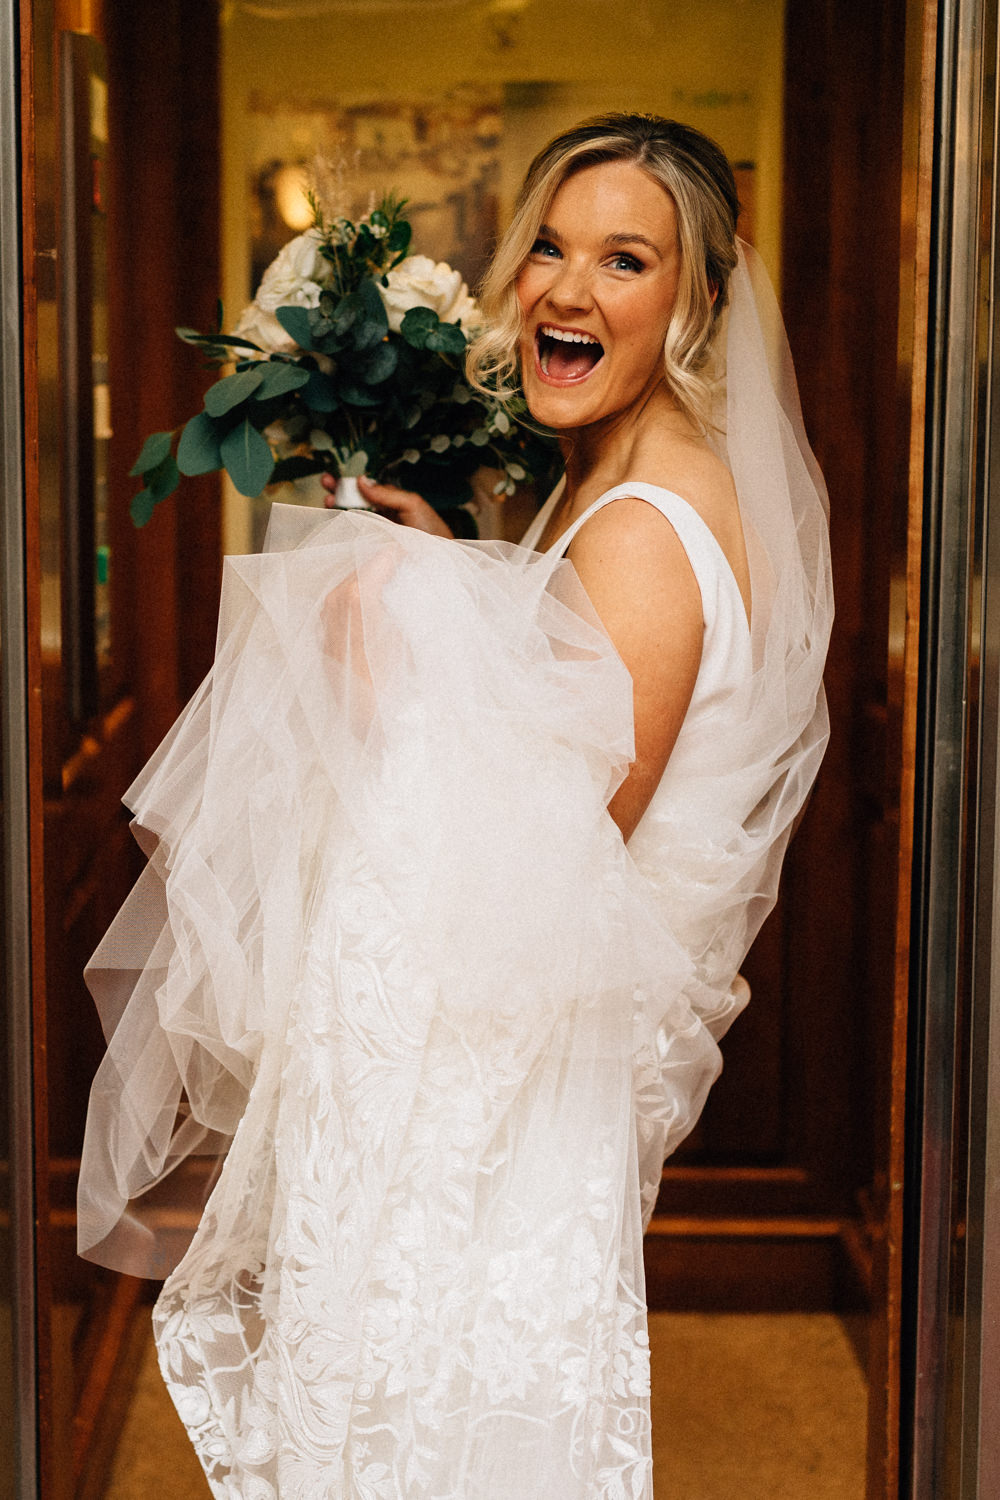 bride getting in the lift laughing Weddings at Killruddery House